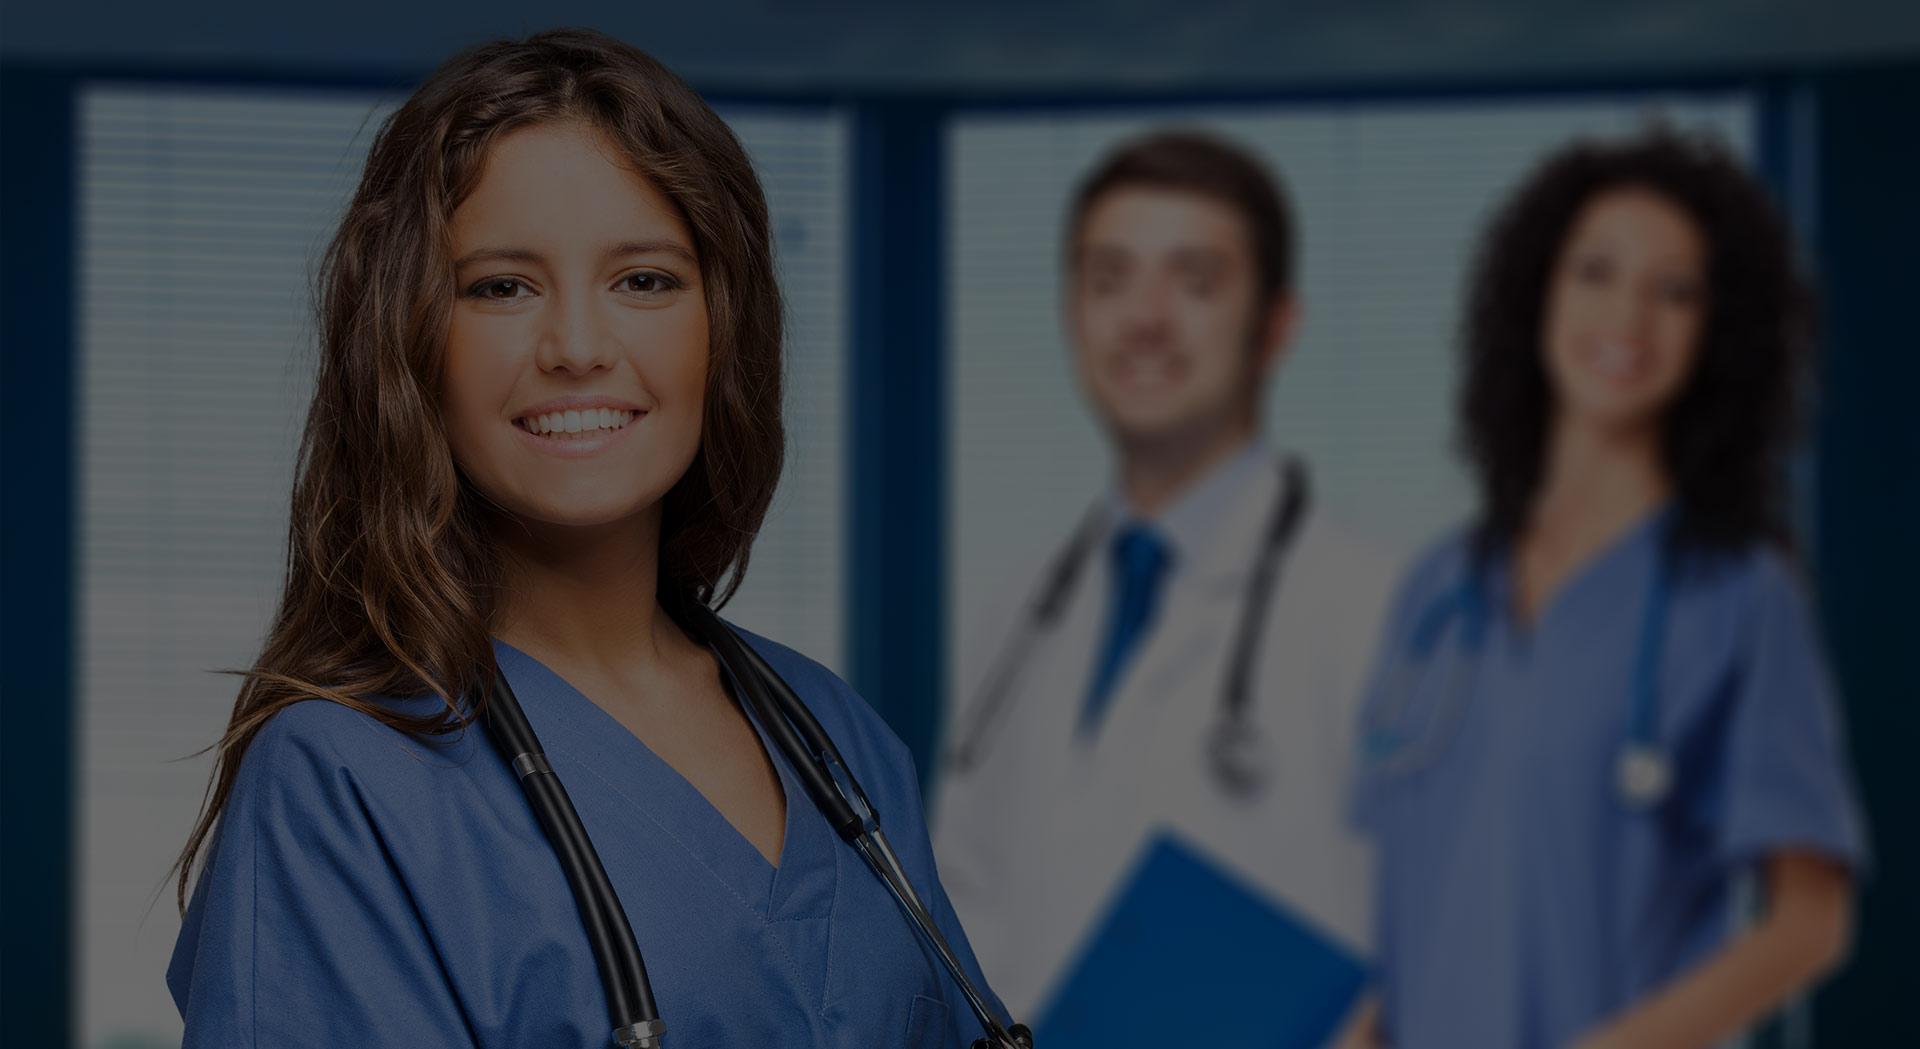 How to Choose a Medical Assisting Degree Program